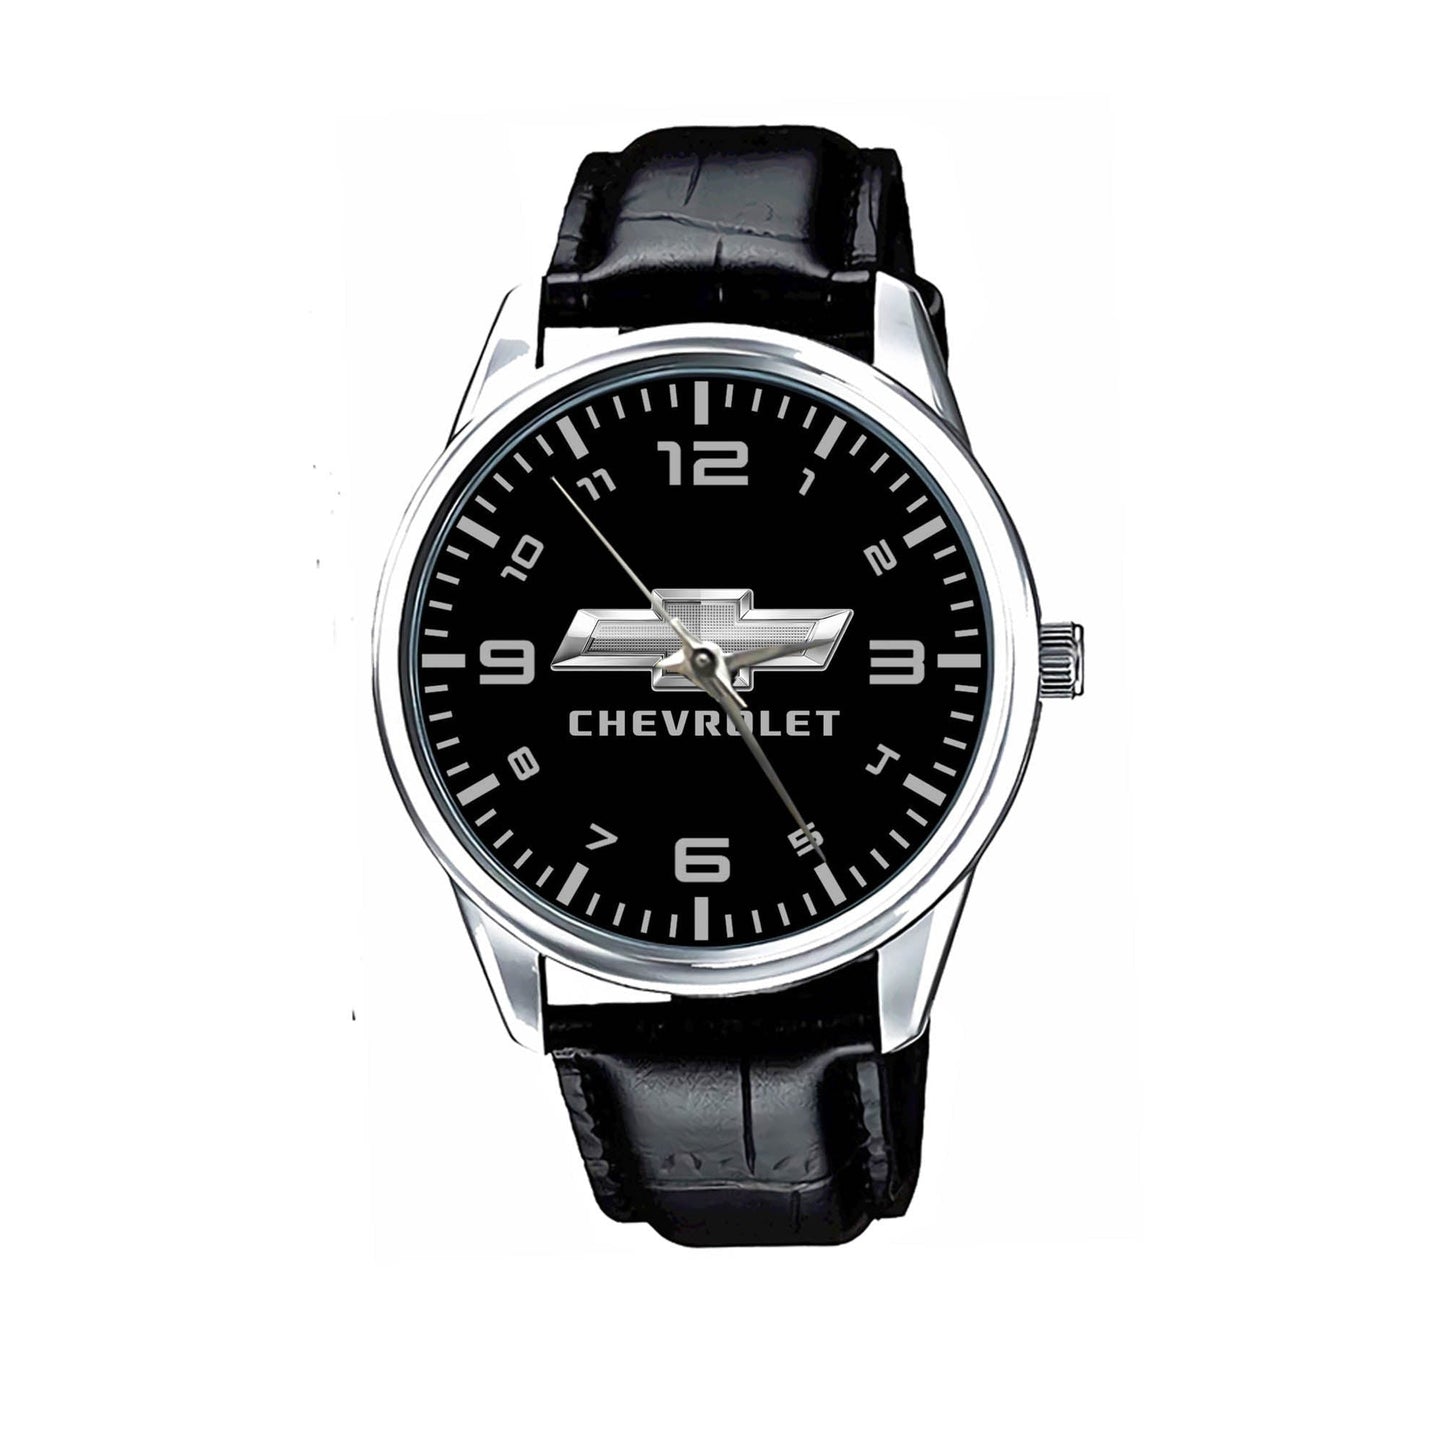 Chevrolet Watches KP396